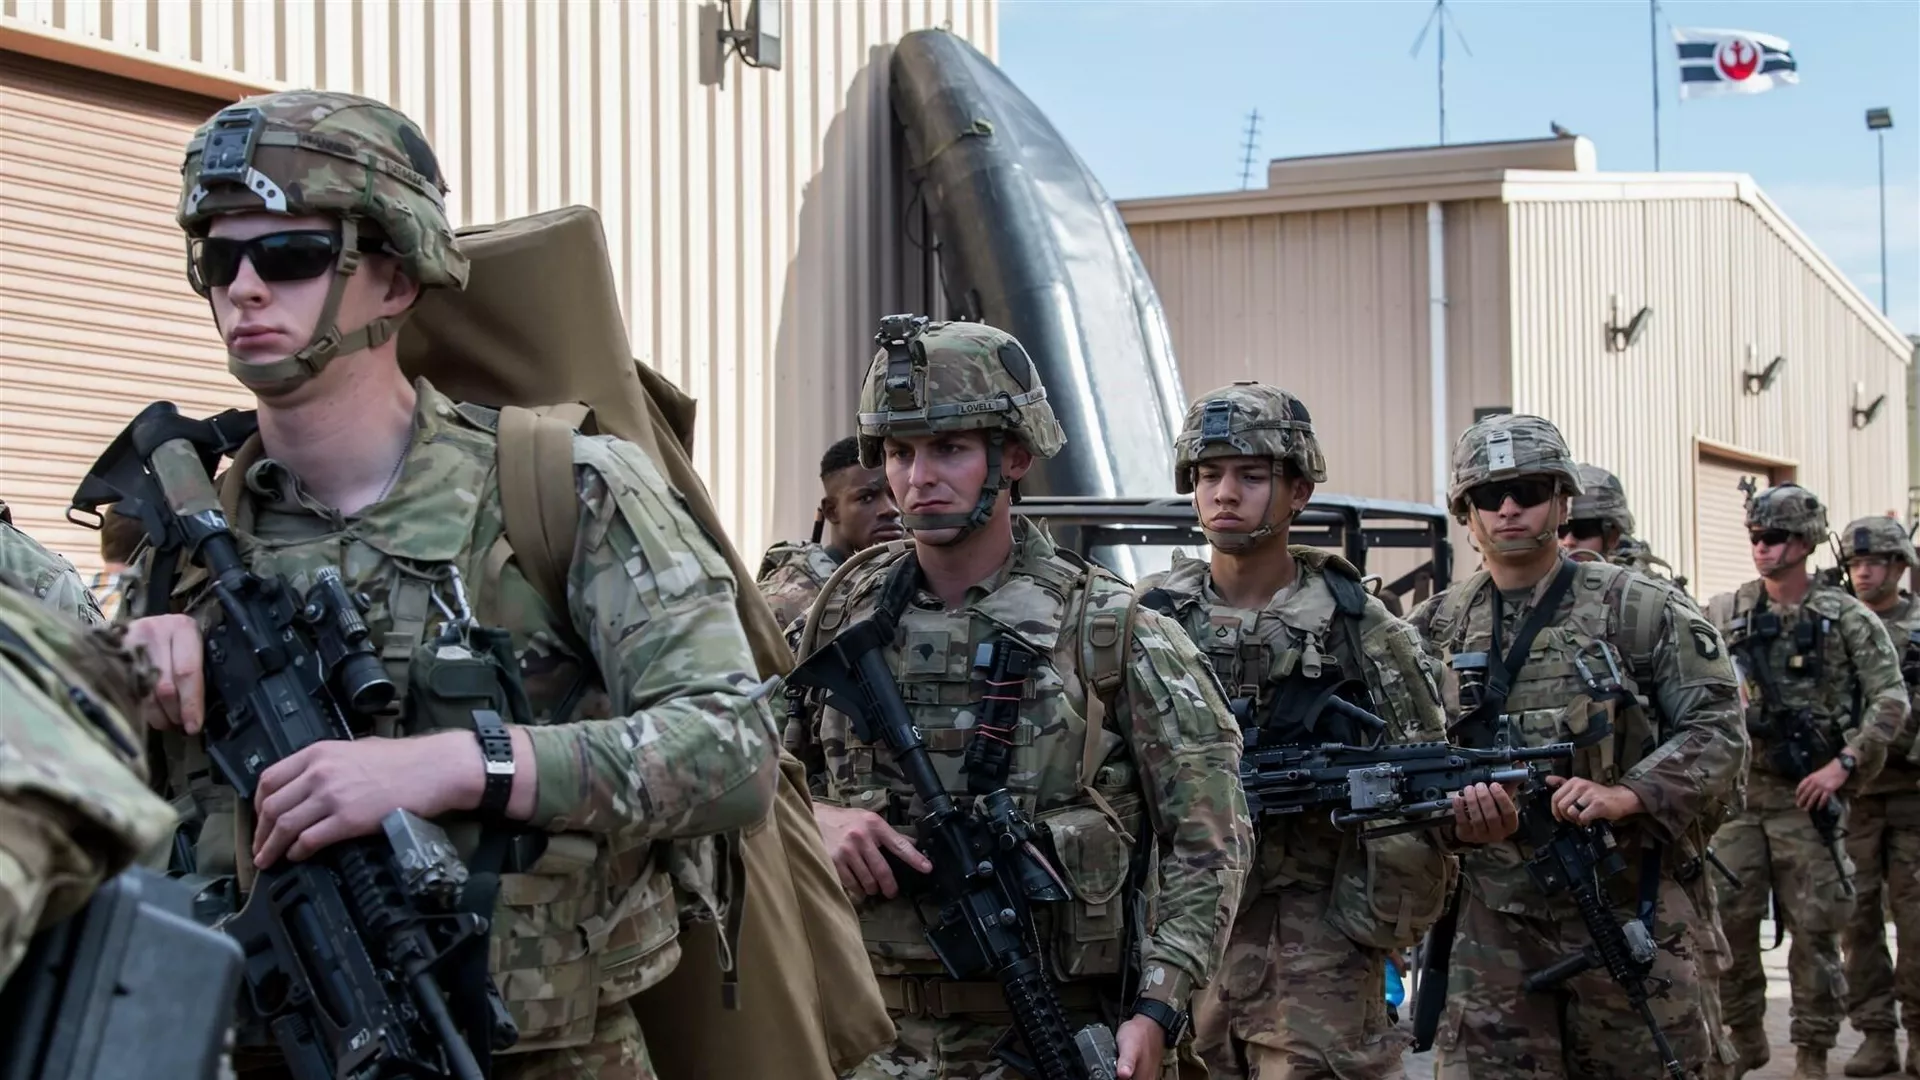 U.S. Soldiers assigned to the East Africa Response Force (EARF), deployed in support of Combined Joint Task Force-Horn of Africa, prepare to depart for Libreville, Gabon, at Camp Lemonnier, Djibouti, Jan. 2, 2019 - Sputnik International, 1920, 10.12.2023